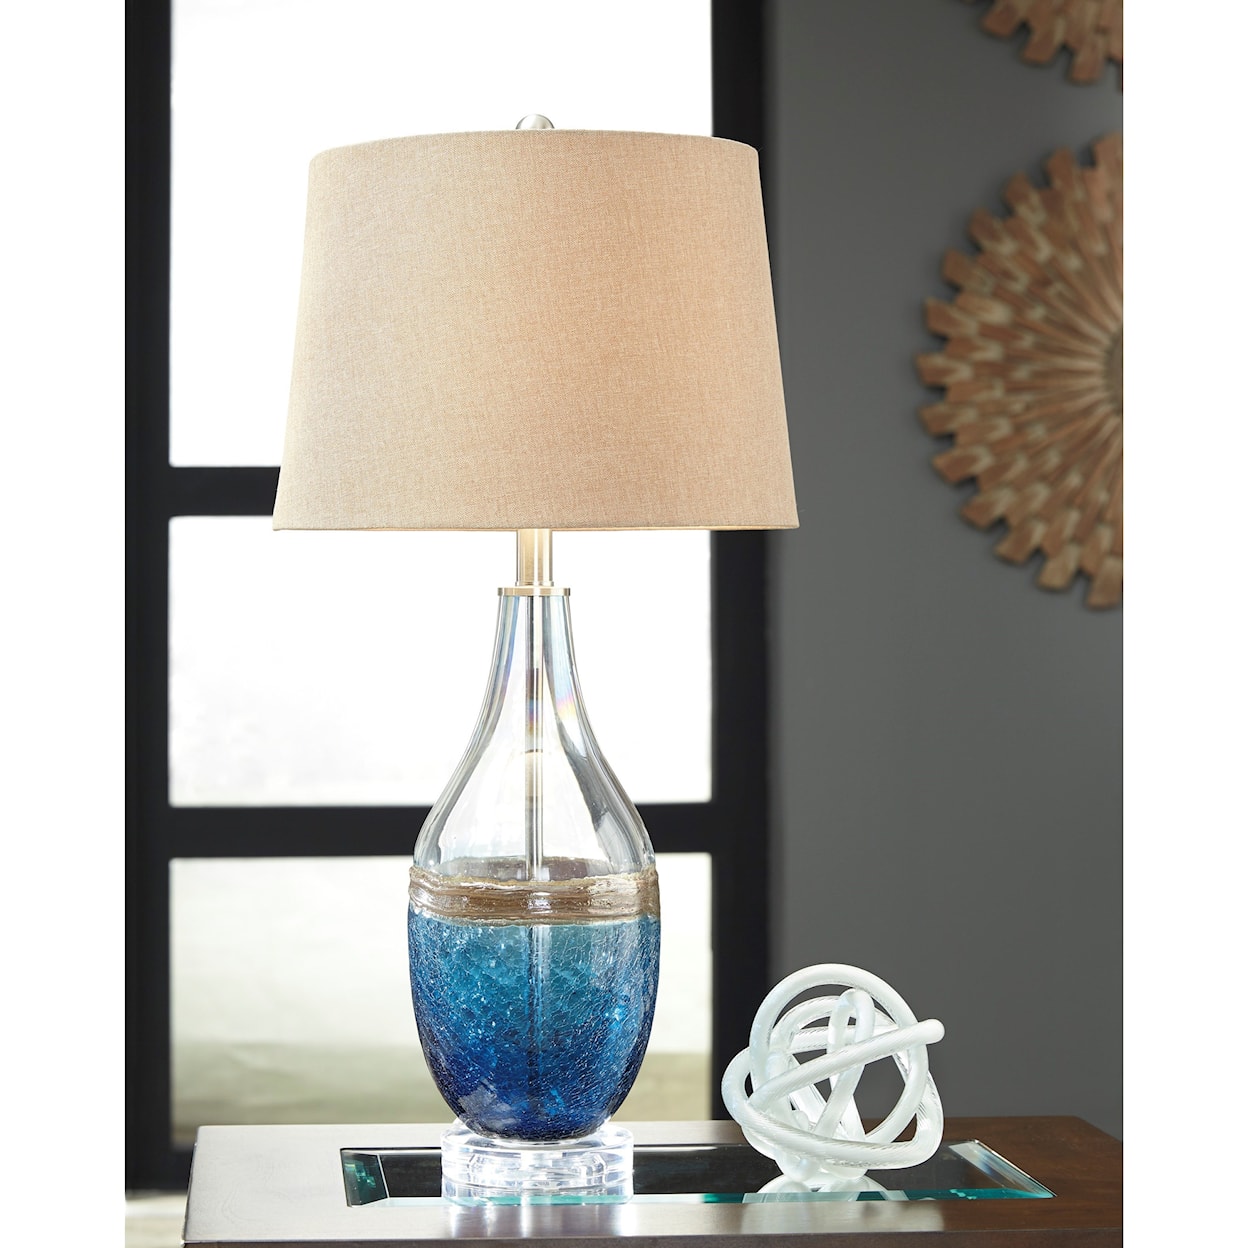 Signature Design by Ashley Lamps - Contemporary Set of 2 Johanna Glass Table Lamps